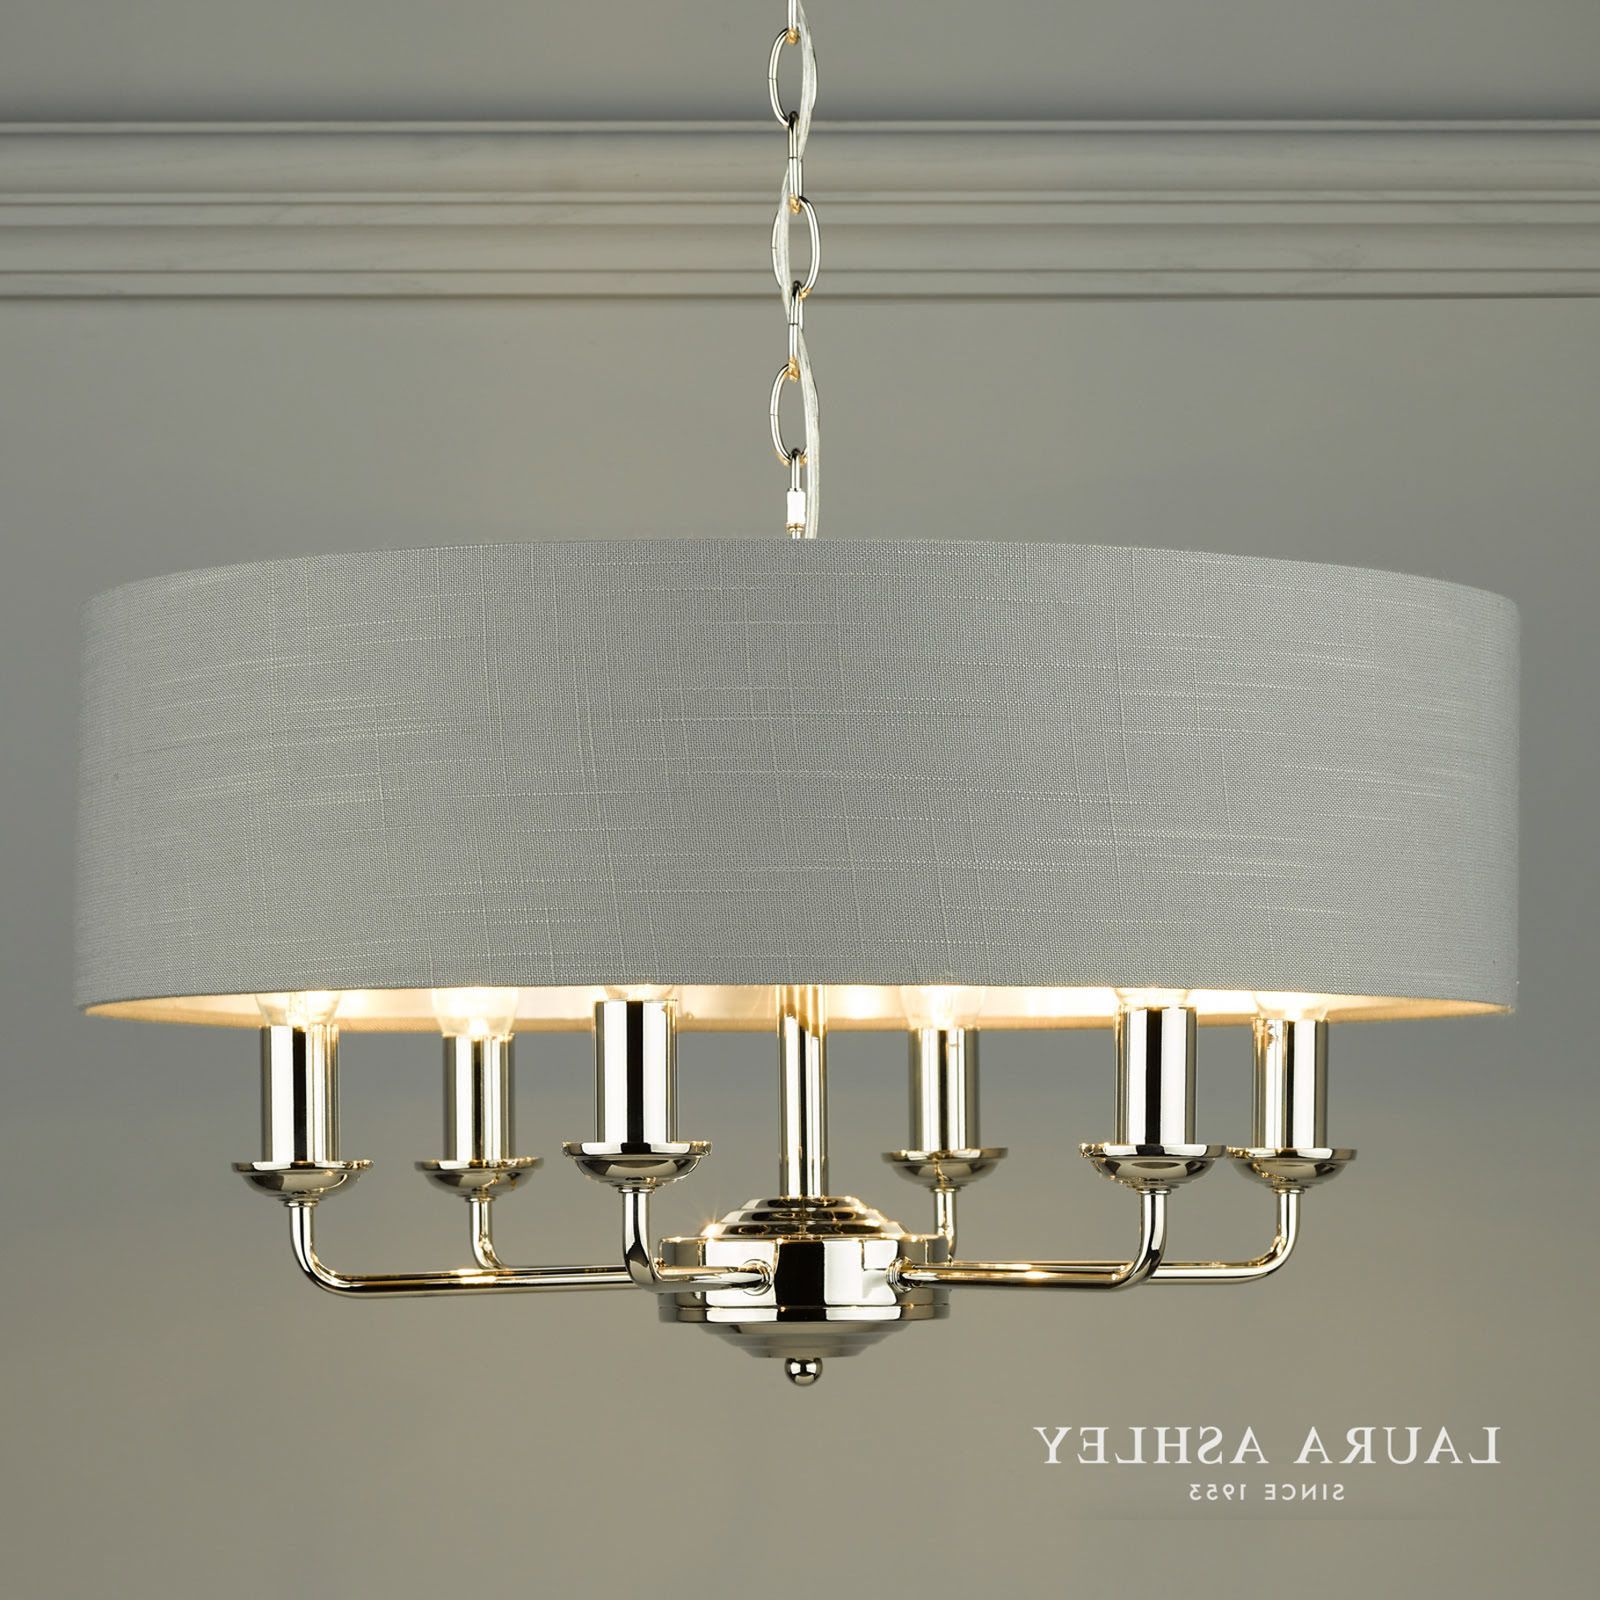 Well Liked Laura Ashley Sorrento Polished Nickel 6 Light Armed In Stone Grey With Brushed Nickel Six Light Chandeliers (View 9 of 15)